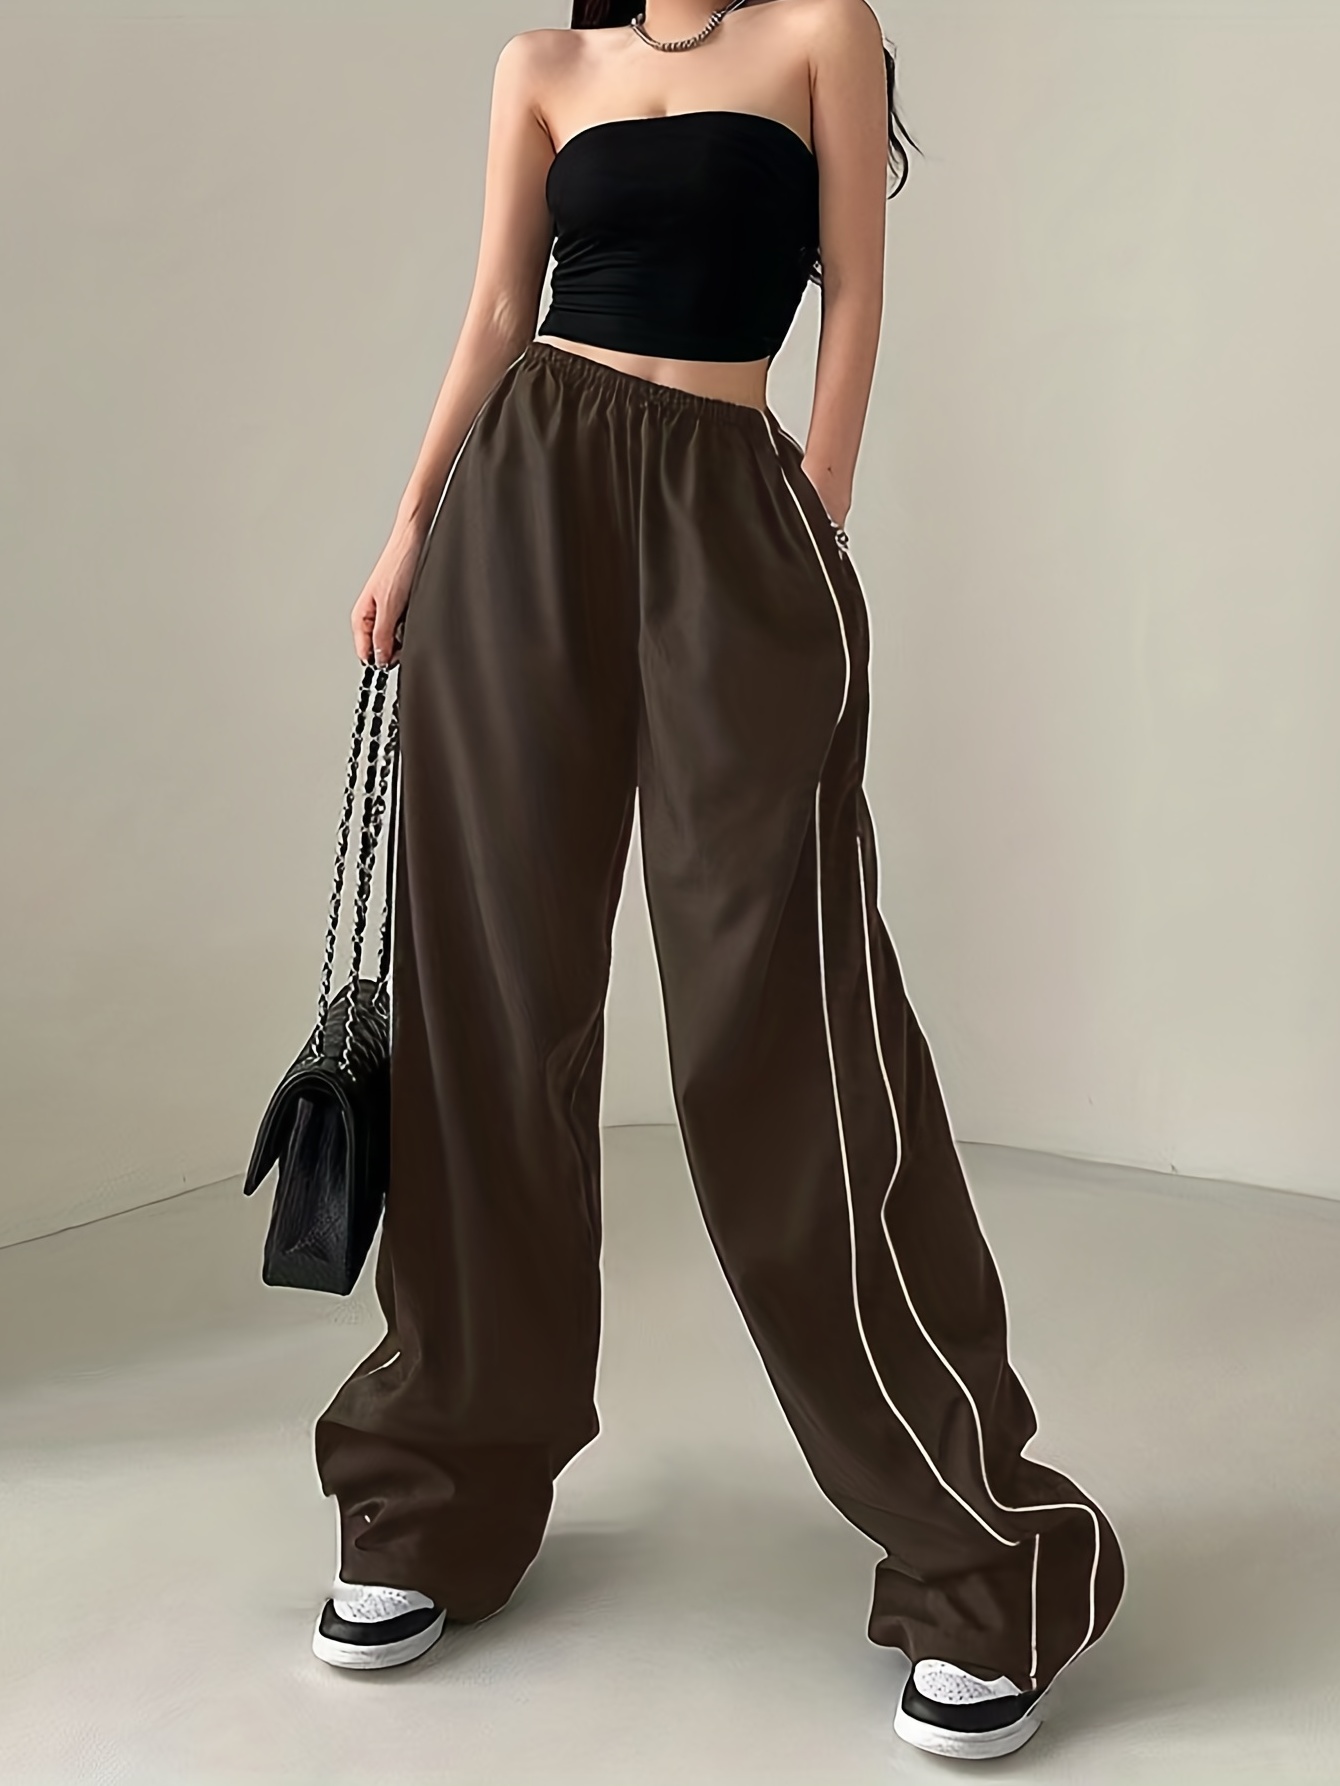 Silk Cotton Summer Wide Leg Pants for Women Casual Elastic High Waist New  Fashion Loose Long Pants Pleated Pant Trousers Femme